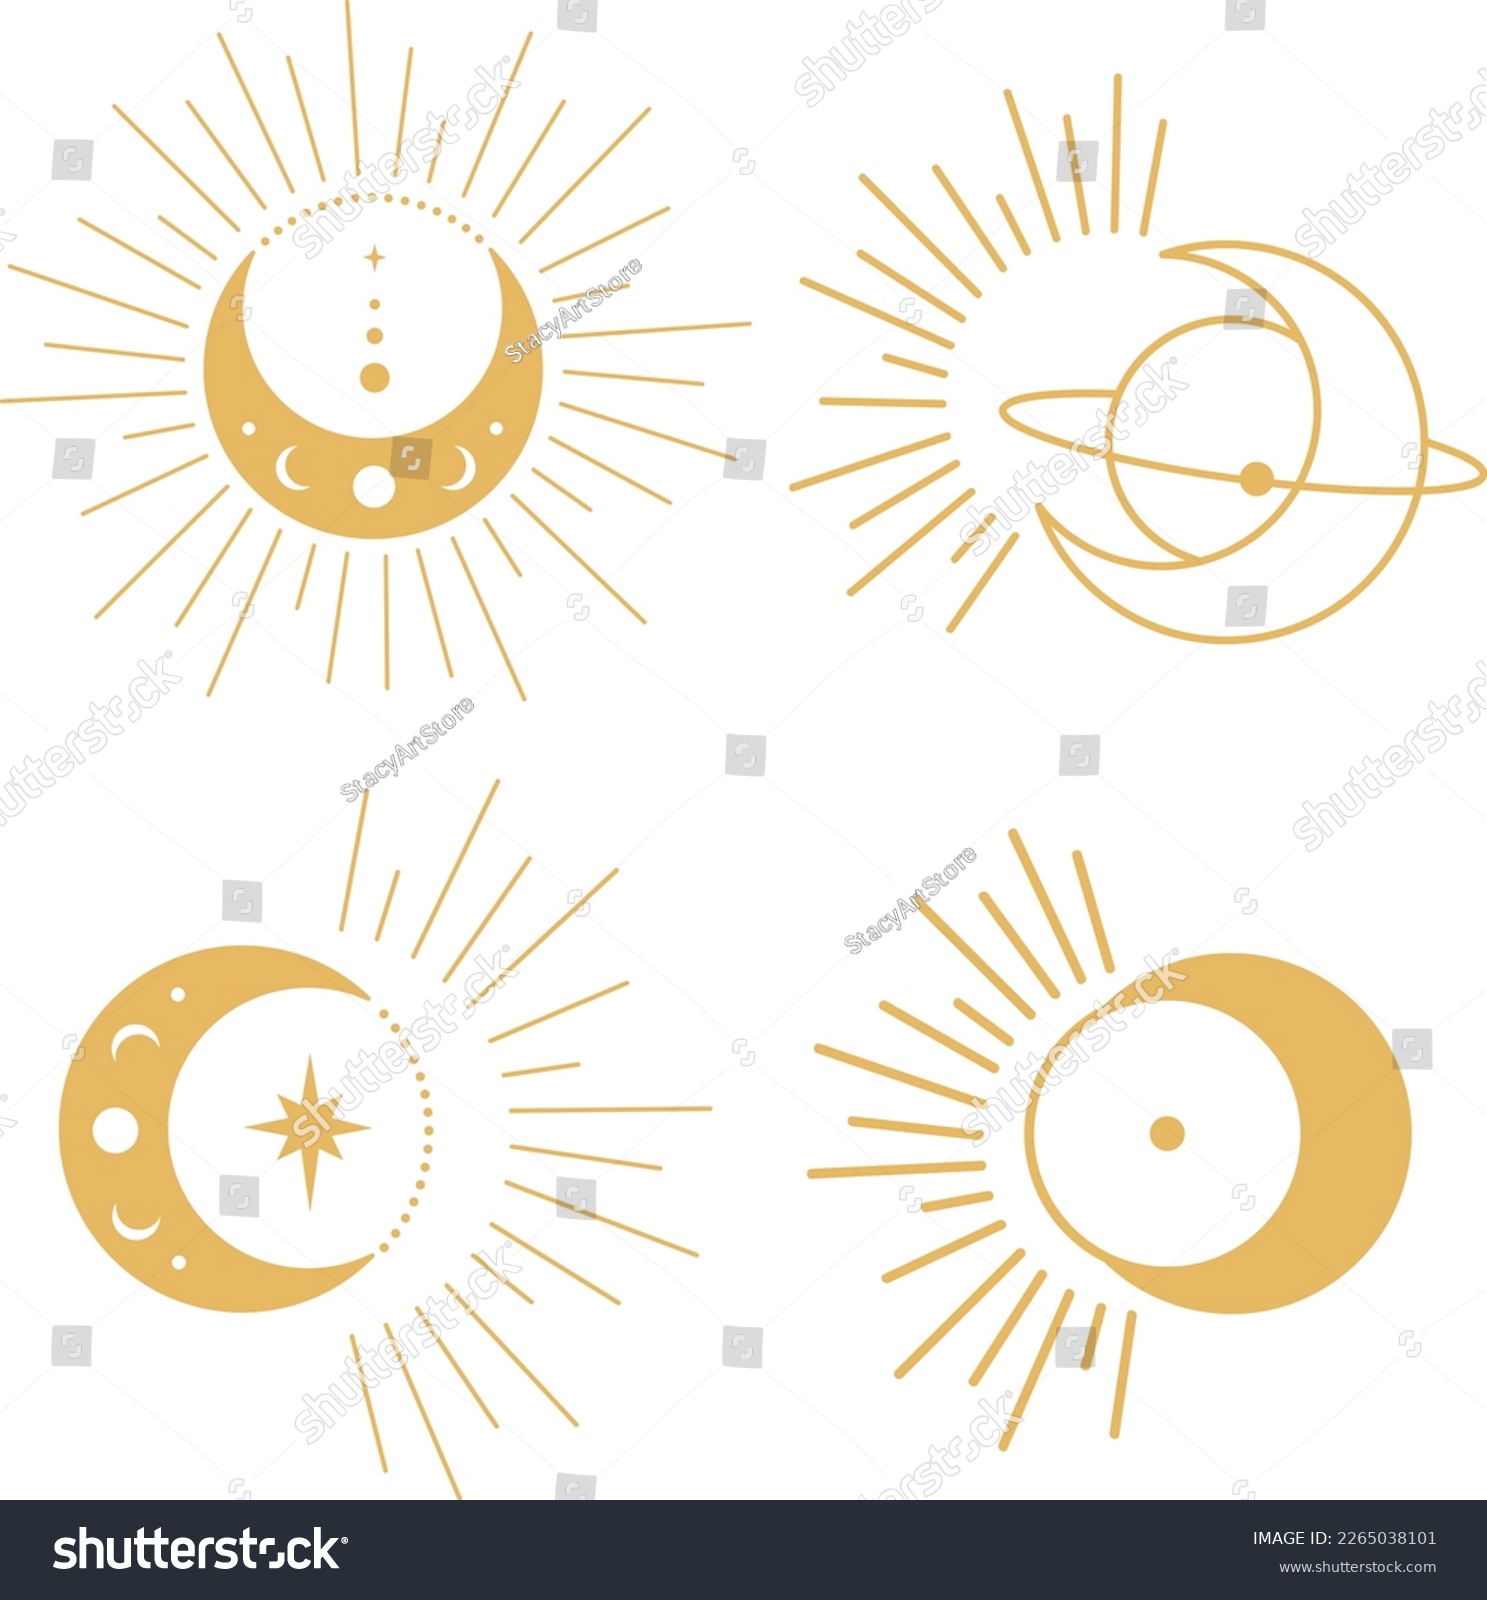 SVG of Bohemian Gold Crescent Moon with Stars and Rays Astrology Illustrations. Moon Phases SVG Vector Clipart. Celestial, Mystical, Esoteric designs perfect for Printing. T-shirt, Mugs, Cut Boards Cut File  svg